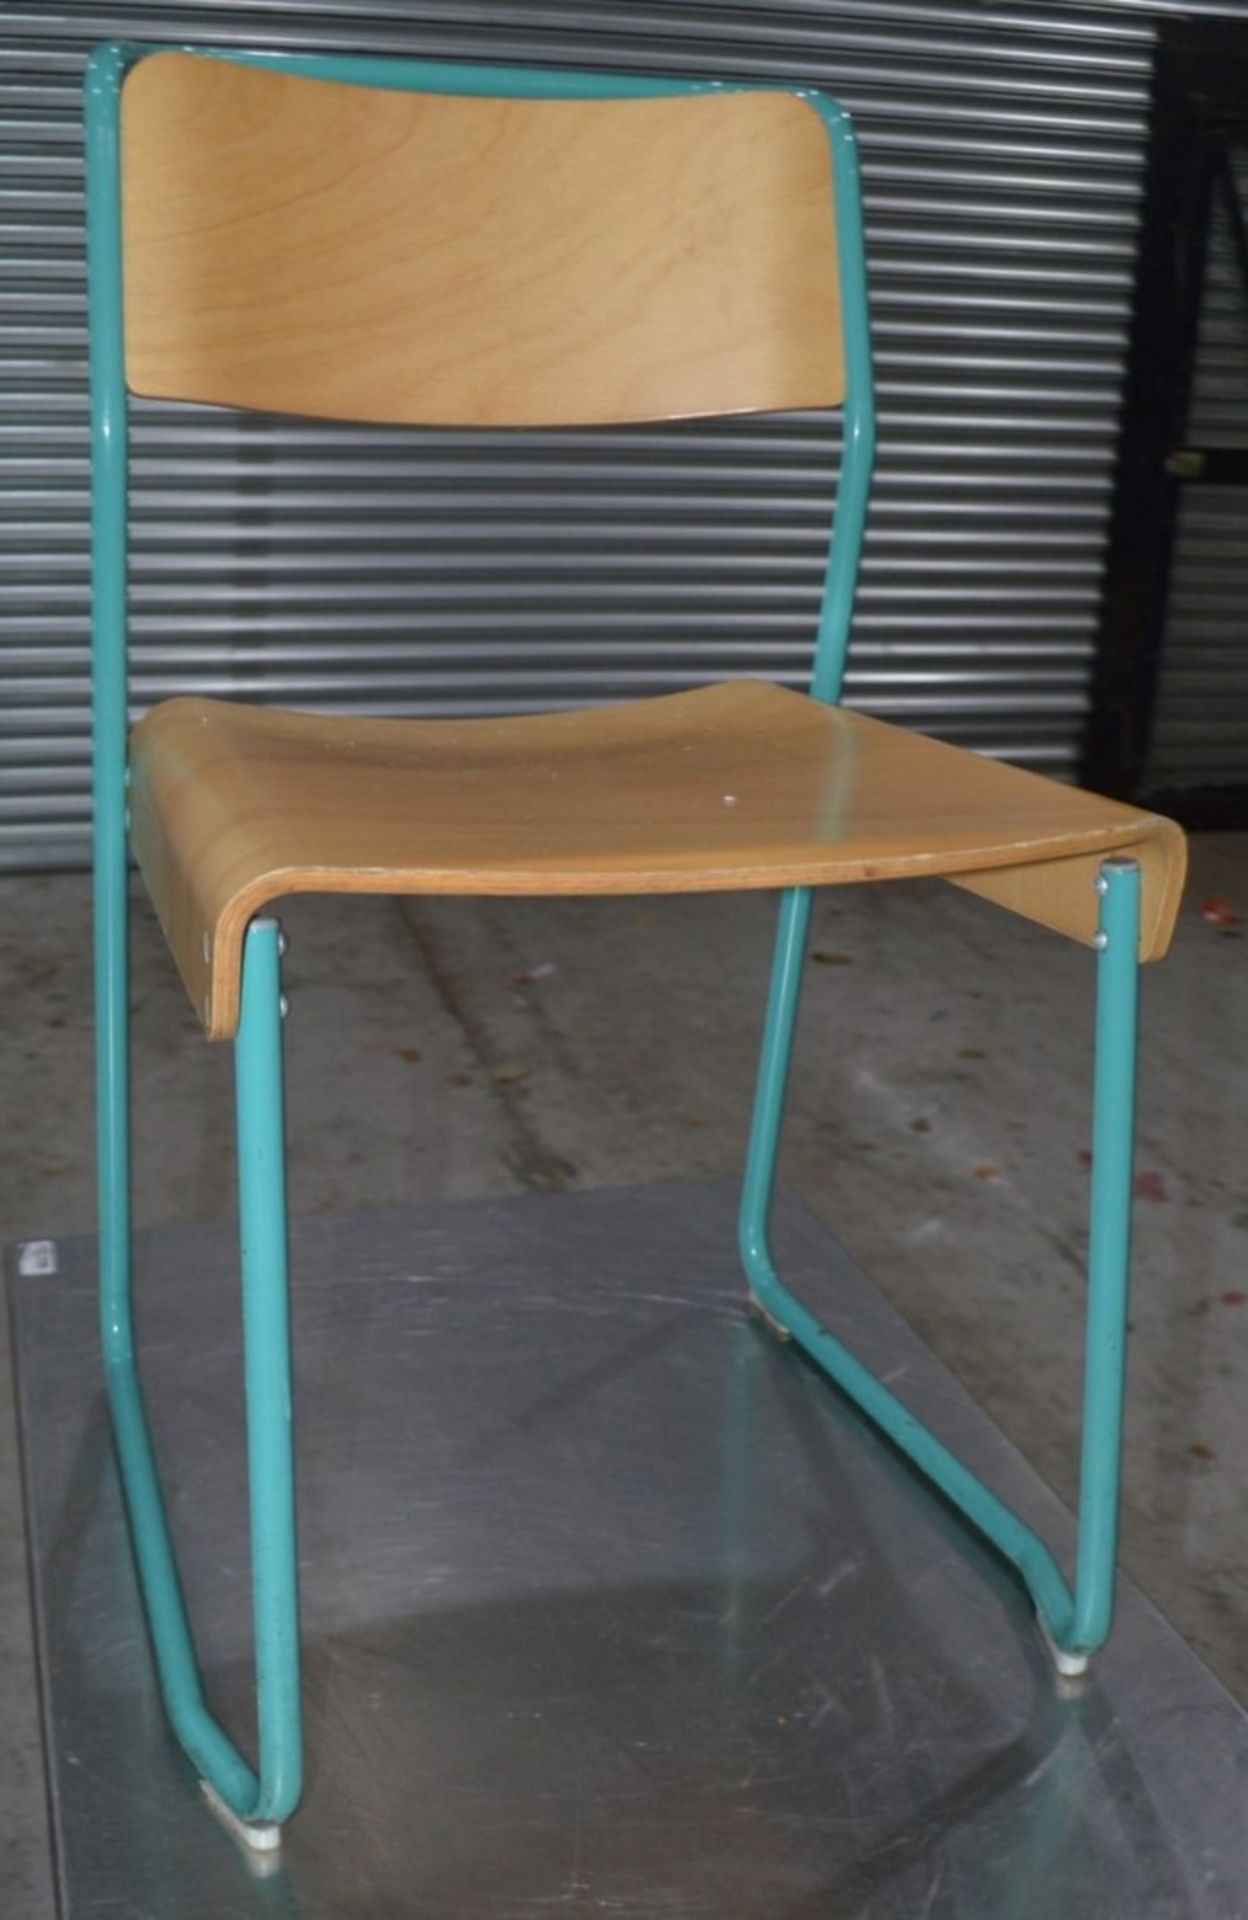 6 x Contemporary Stackable Bistro / Bar Chairs With Metal Frames With Curved Vanished Wooden Seats - Image 12 of 12